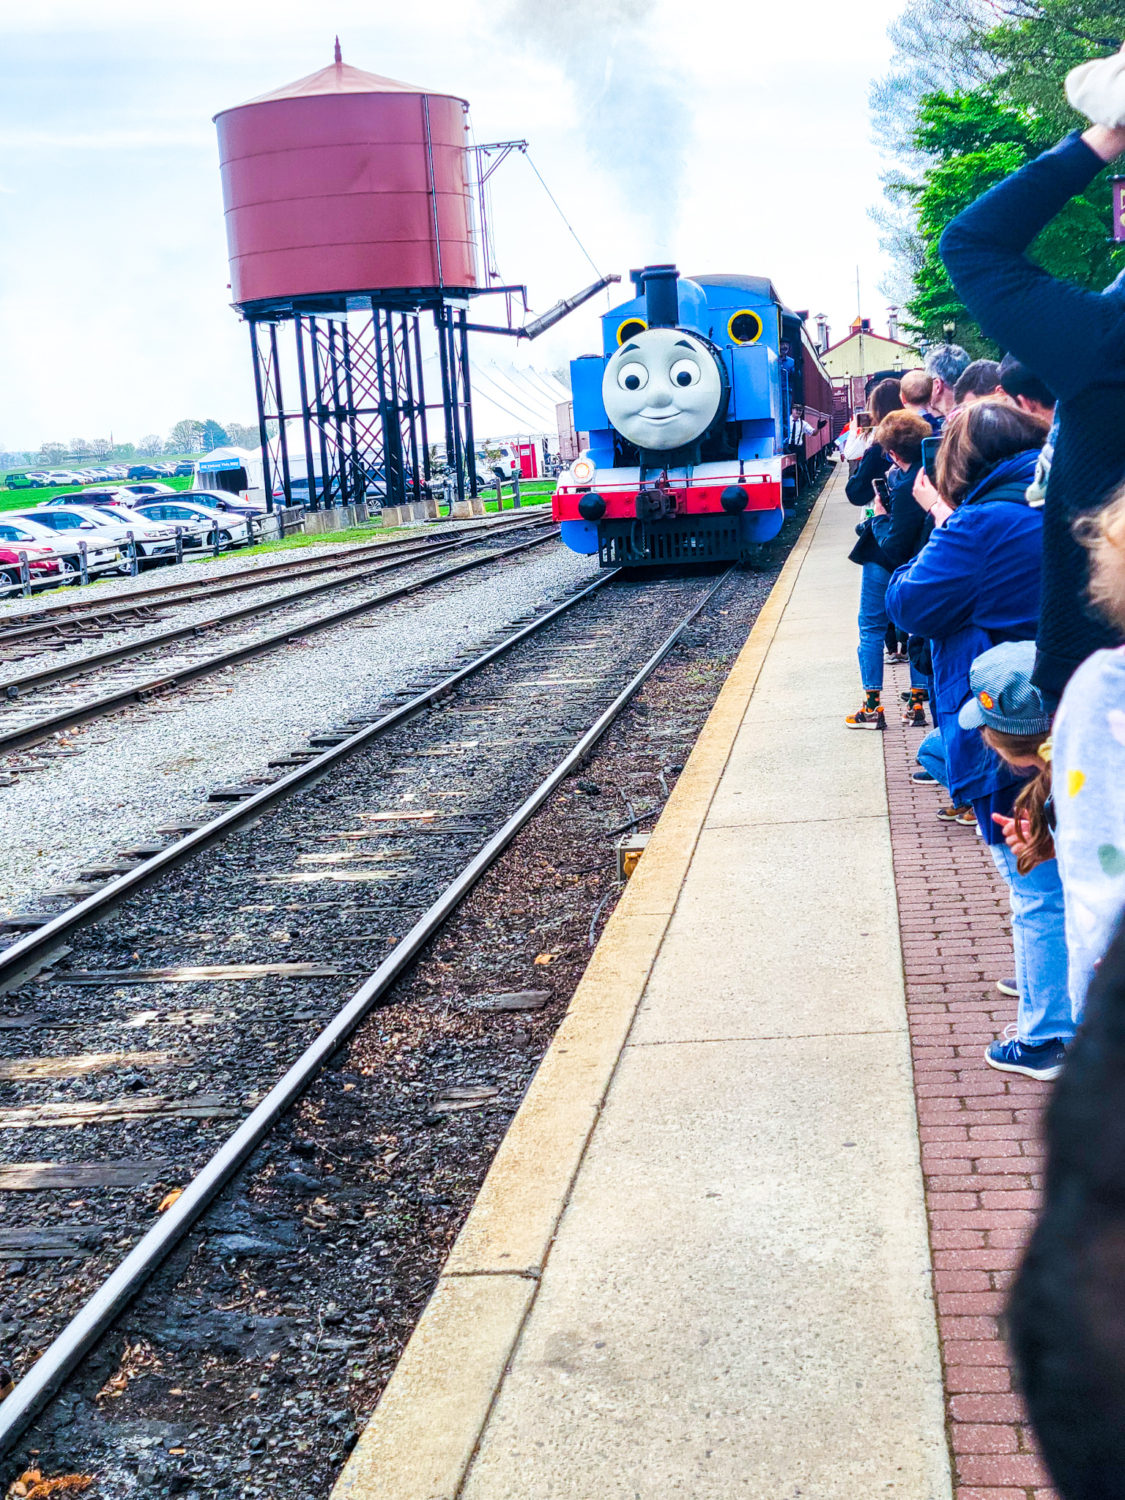 Picture of Thomas The Tank Engine Arriving at Strasburg Railroad